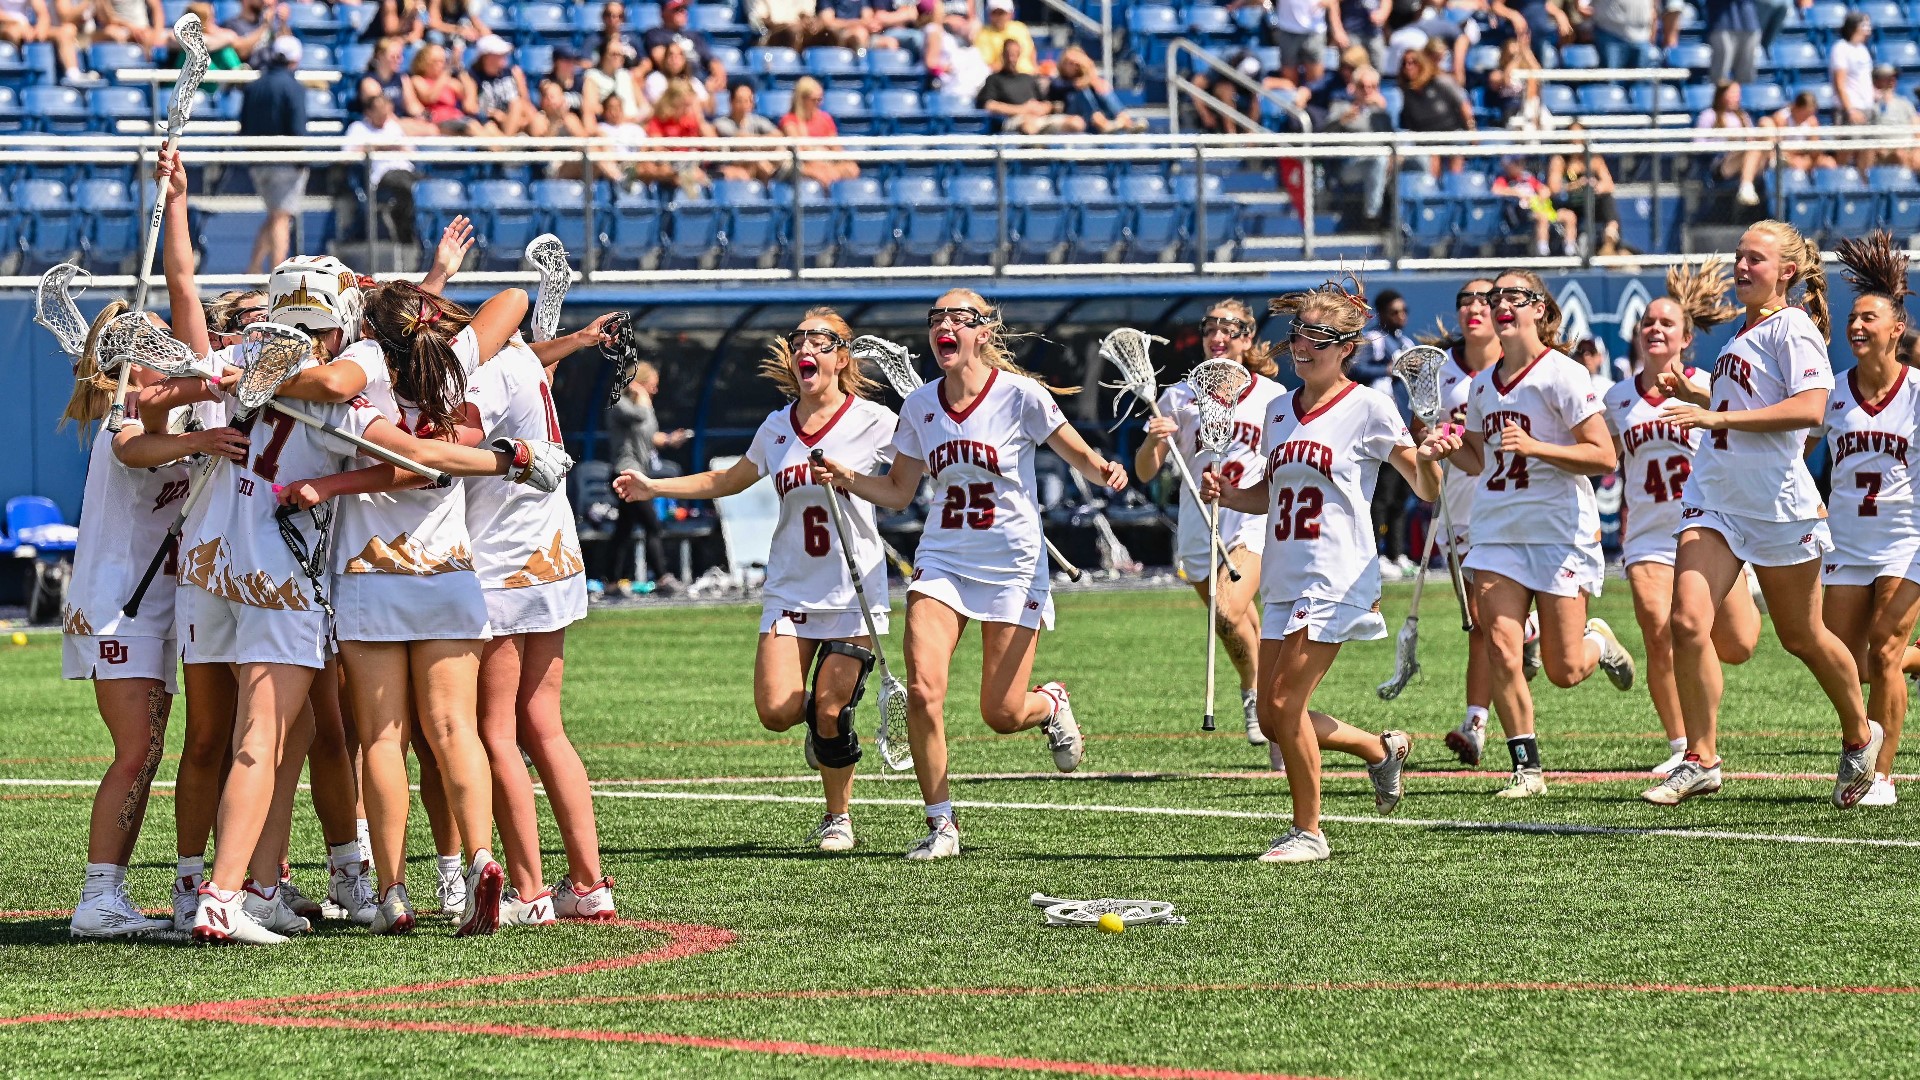 The University of Denver women's lacrosse team finished with the first-ever 19-0 season in program history and won its third-straight Big East title.